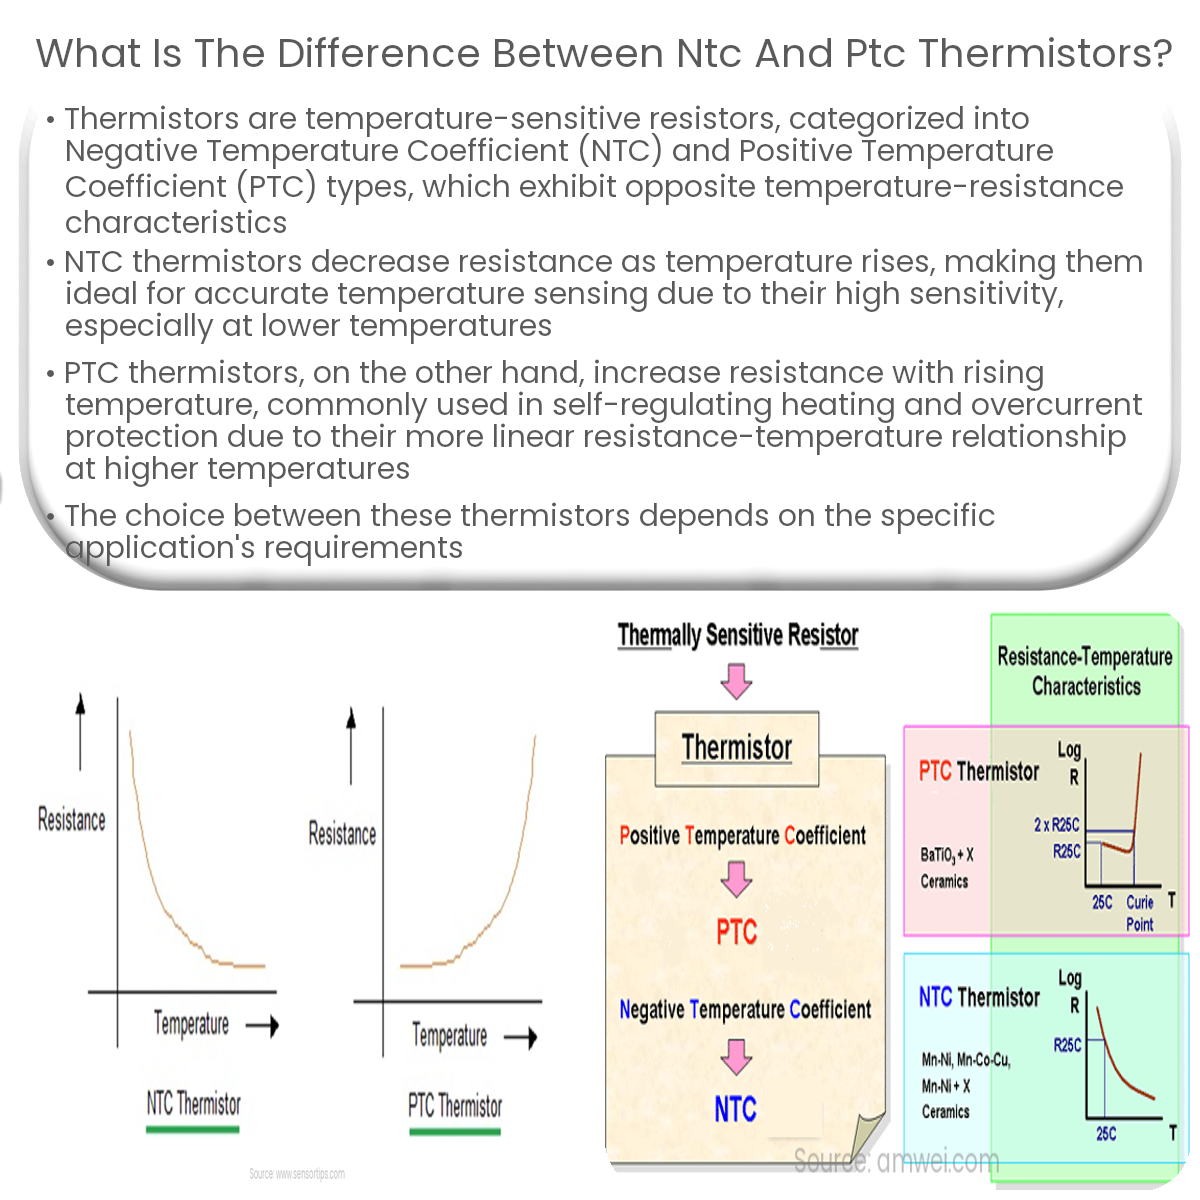 What is the difference between NTC and PTC thermistors?